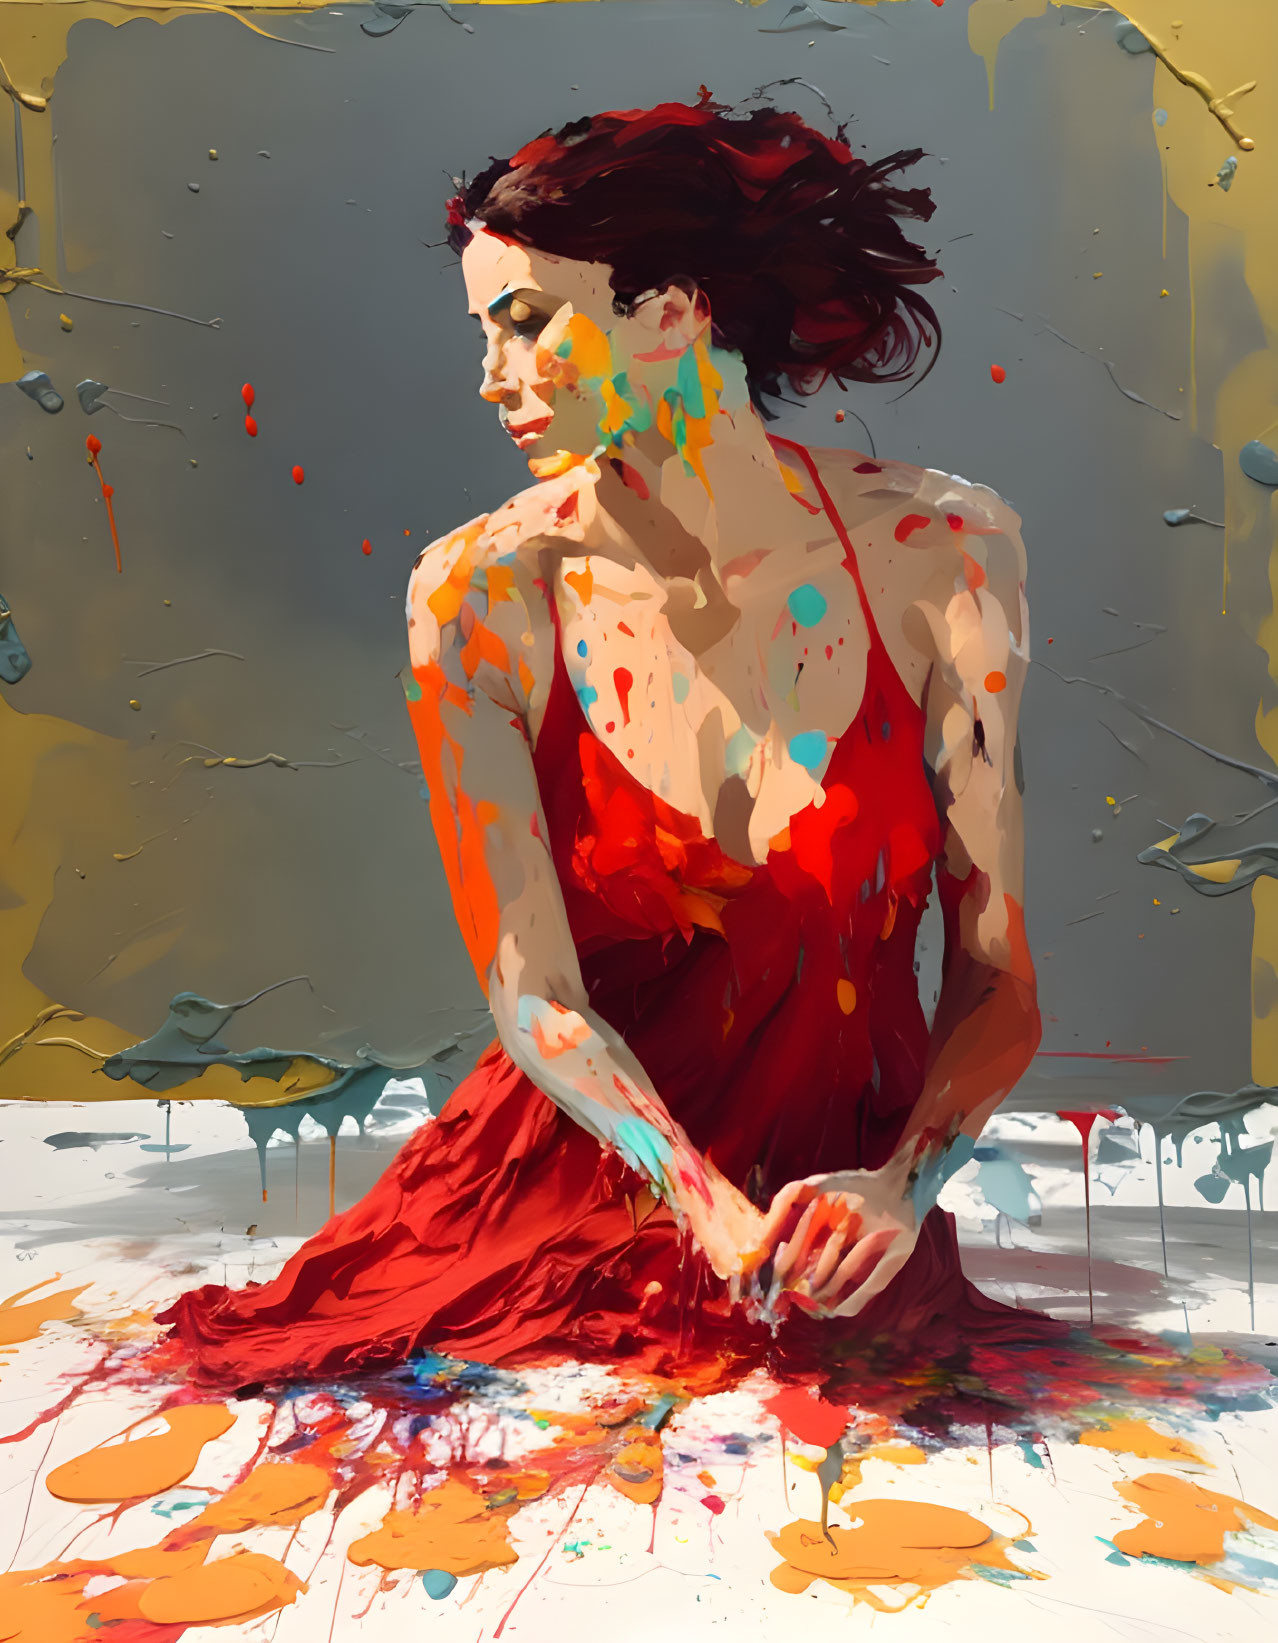 Colorful painting of woman in red dress with splashes of paint, conveying movement and emotion